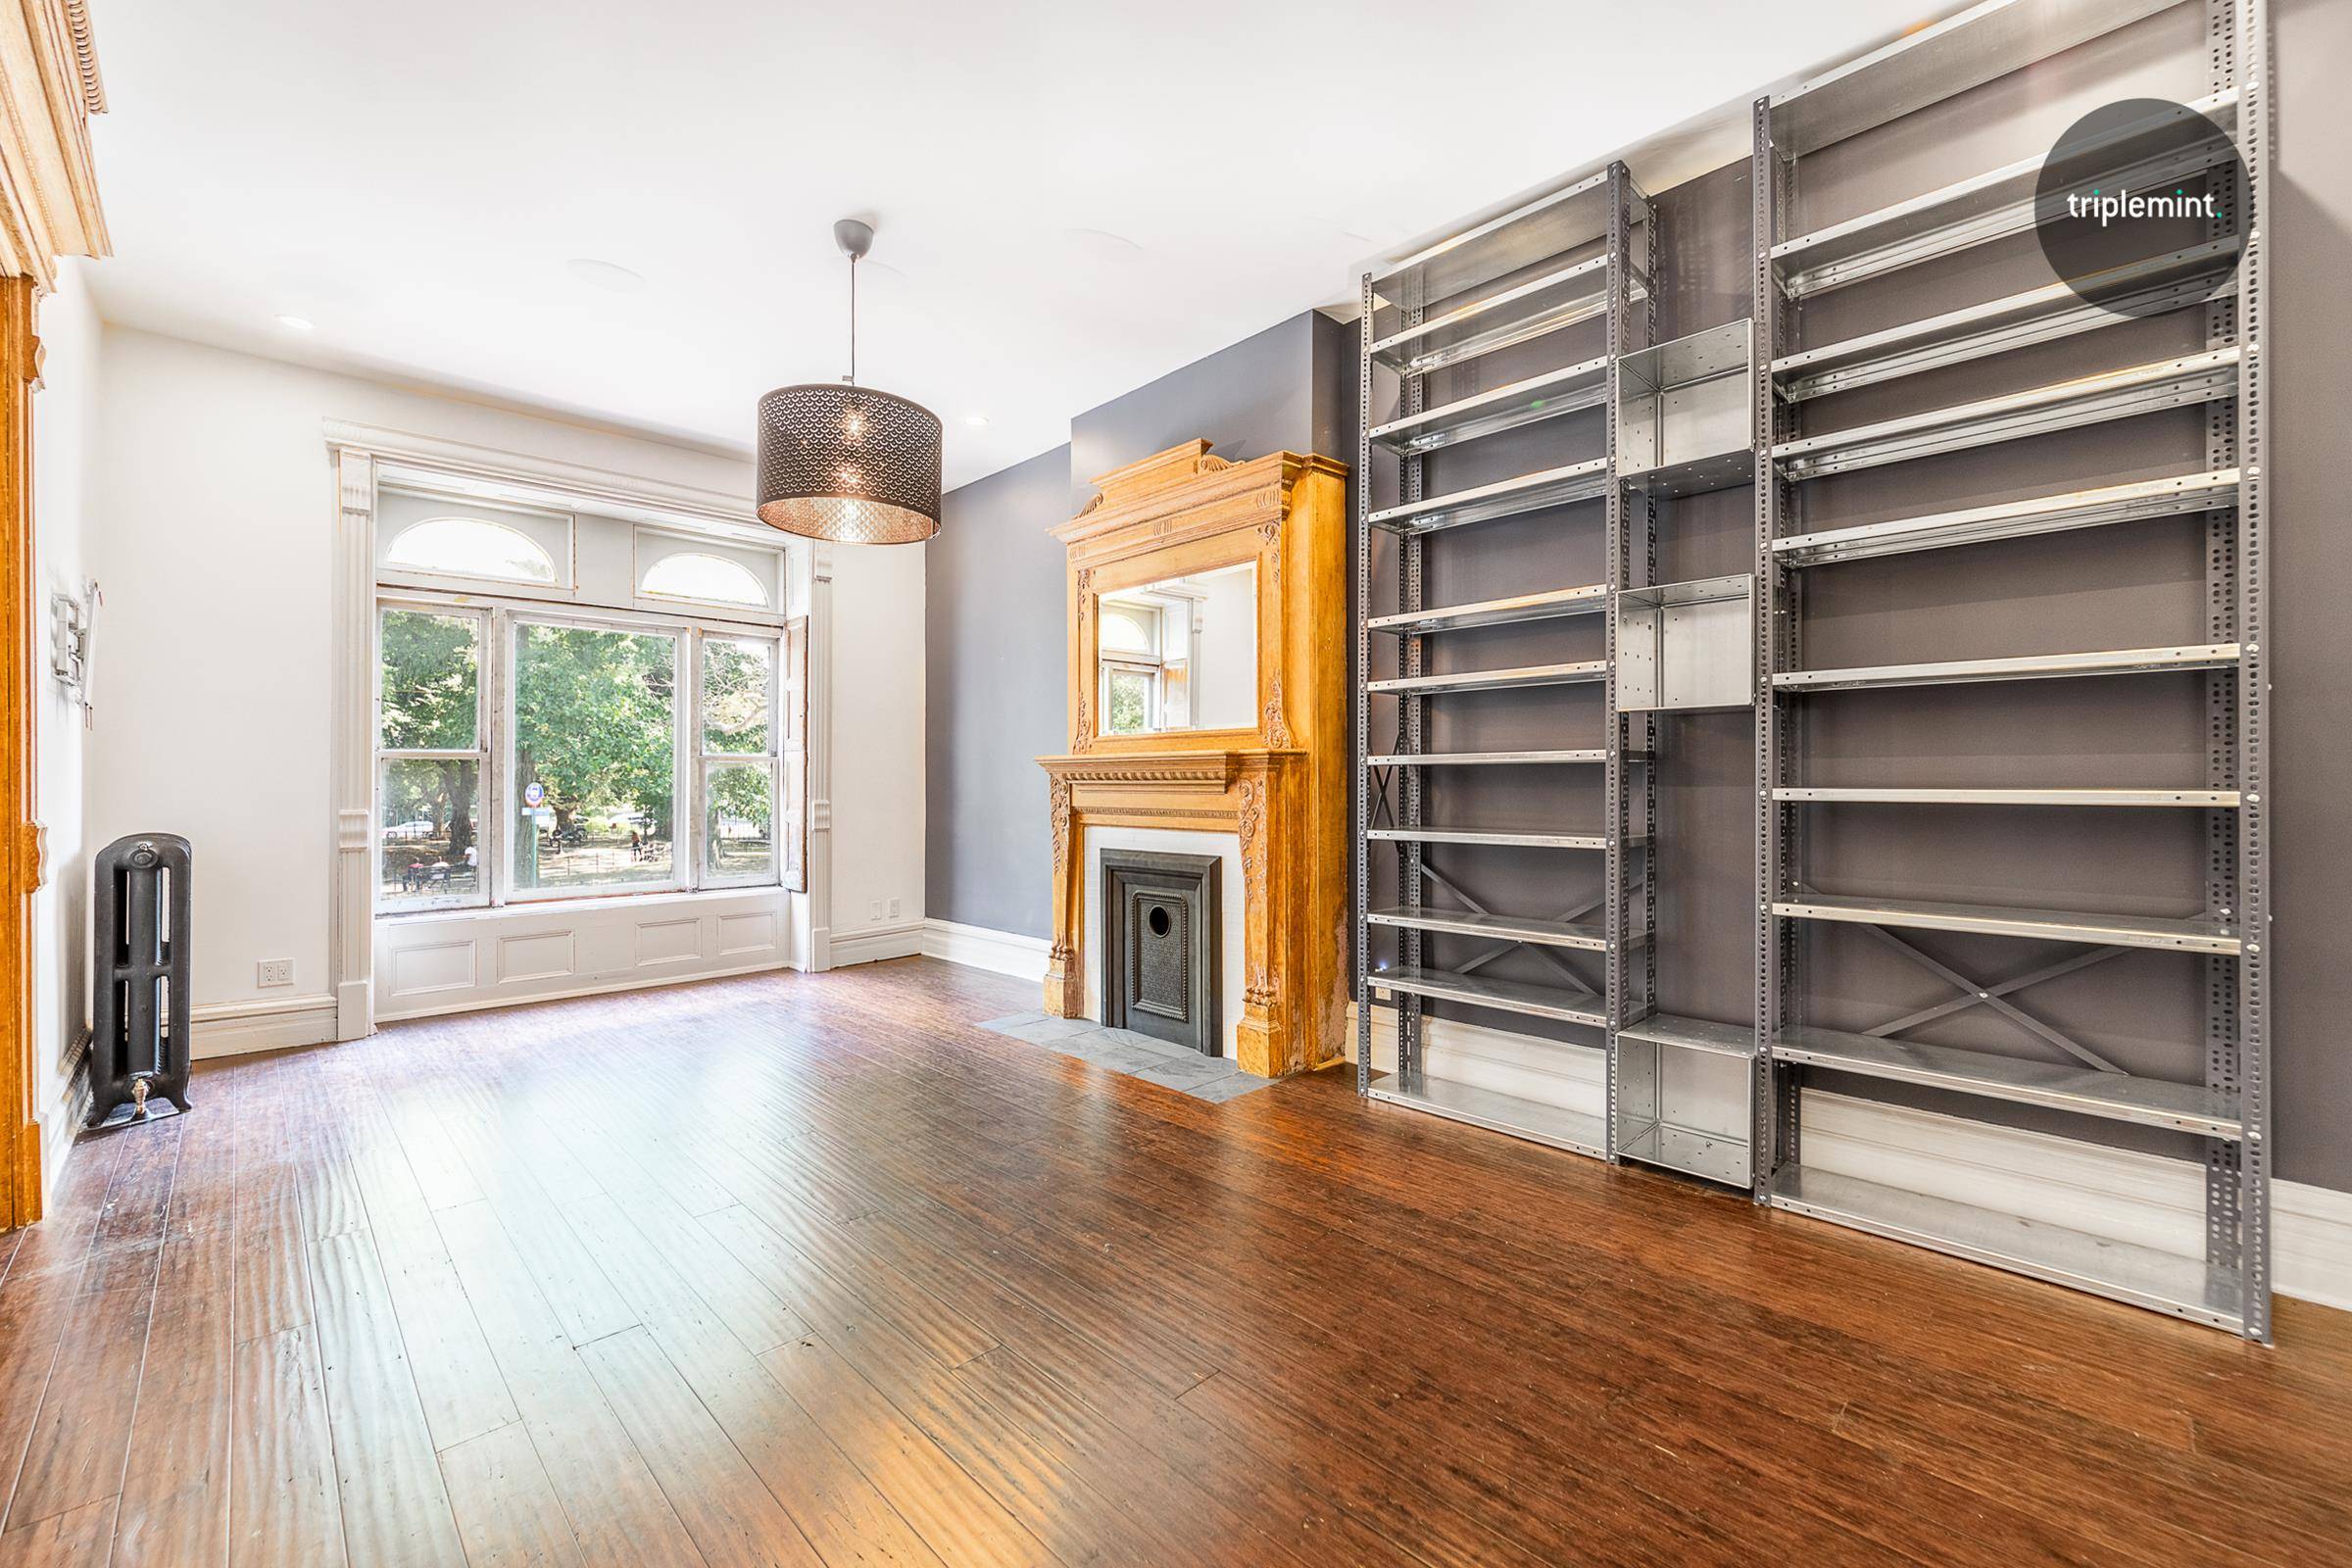 Welcome home to this stunning and rarely available three bedroom, two and a half bathroom duplex in prime Bed Stuy.